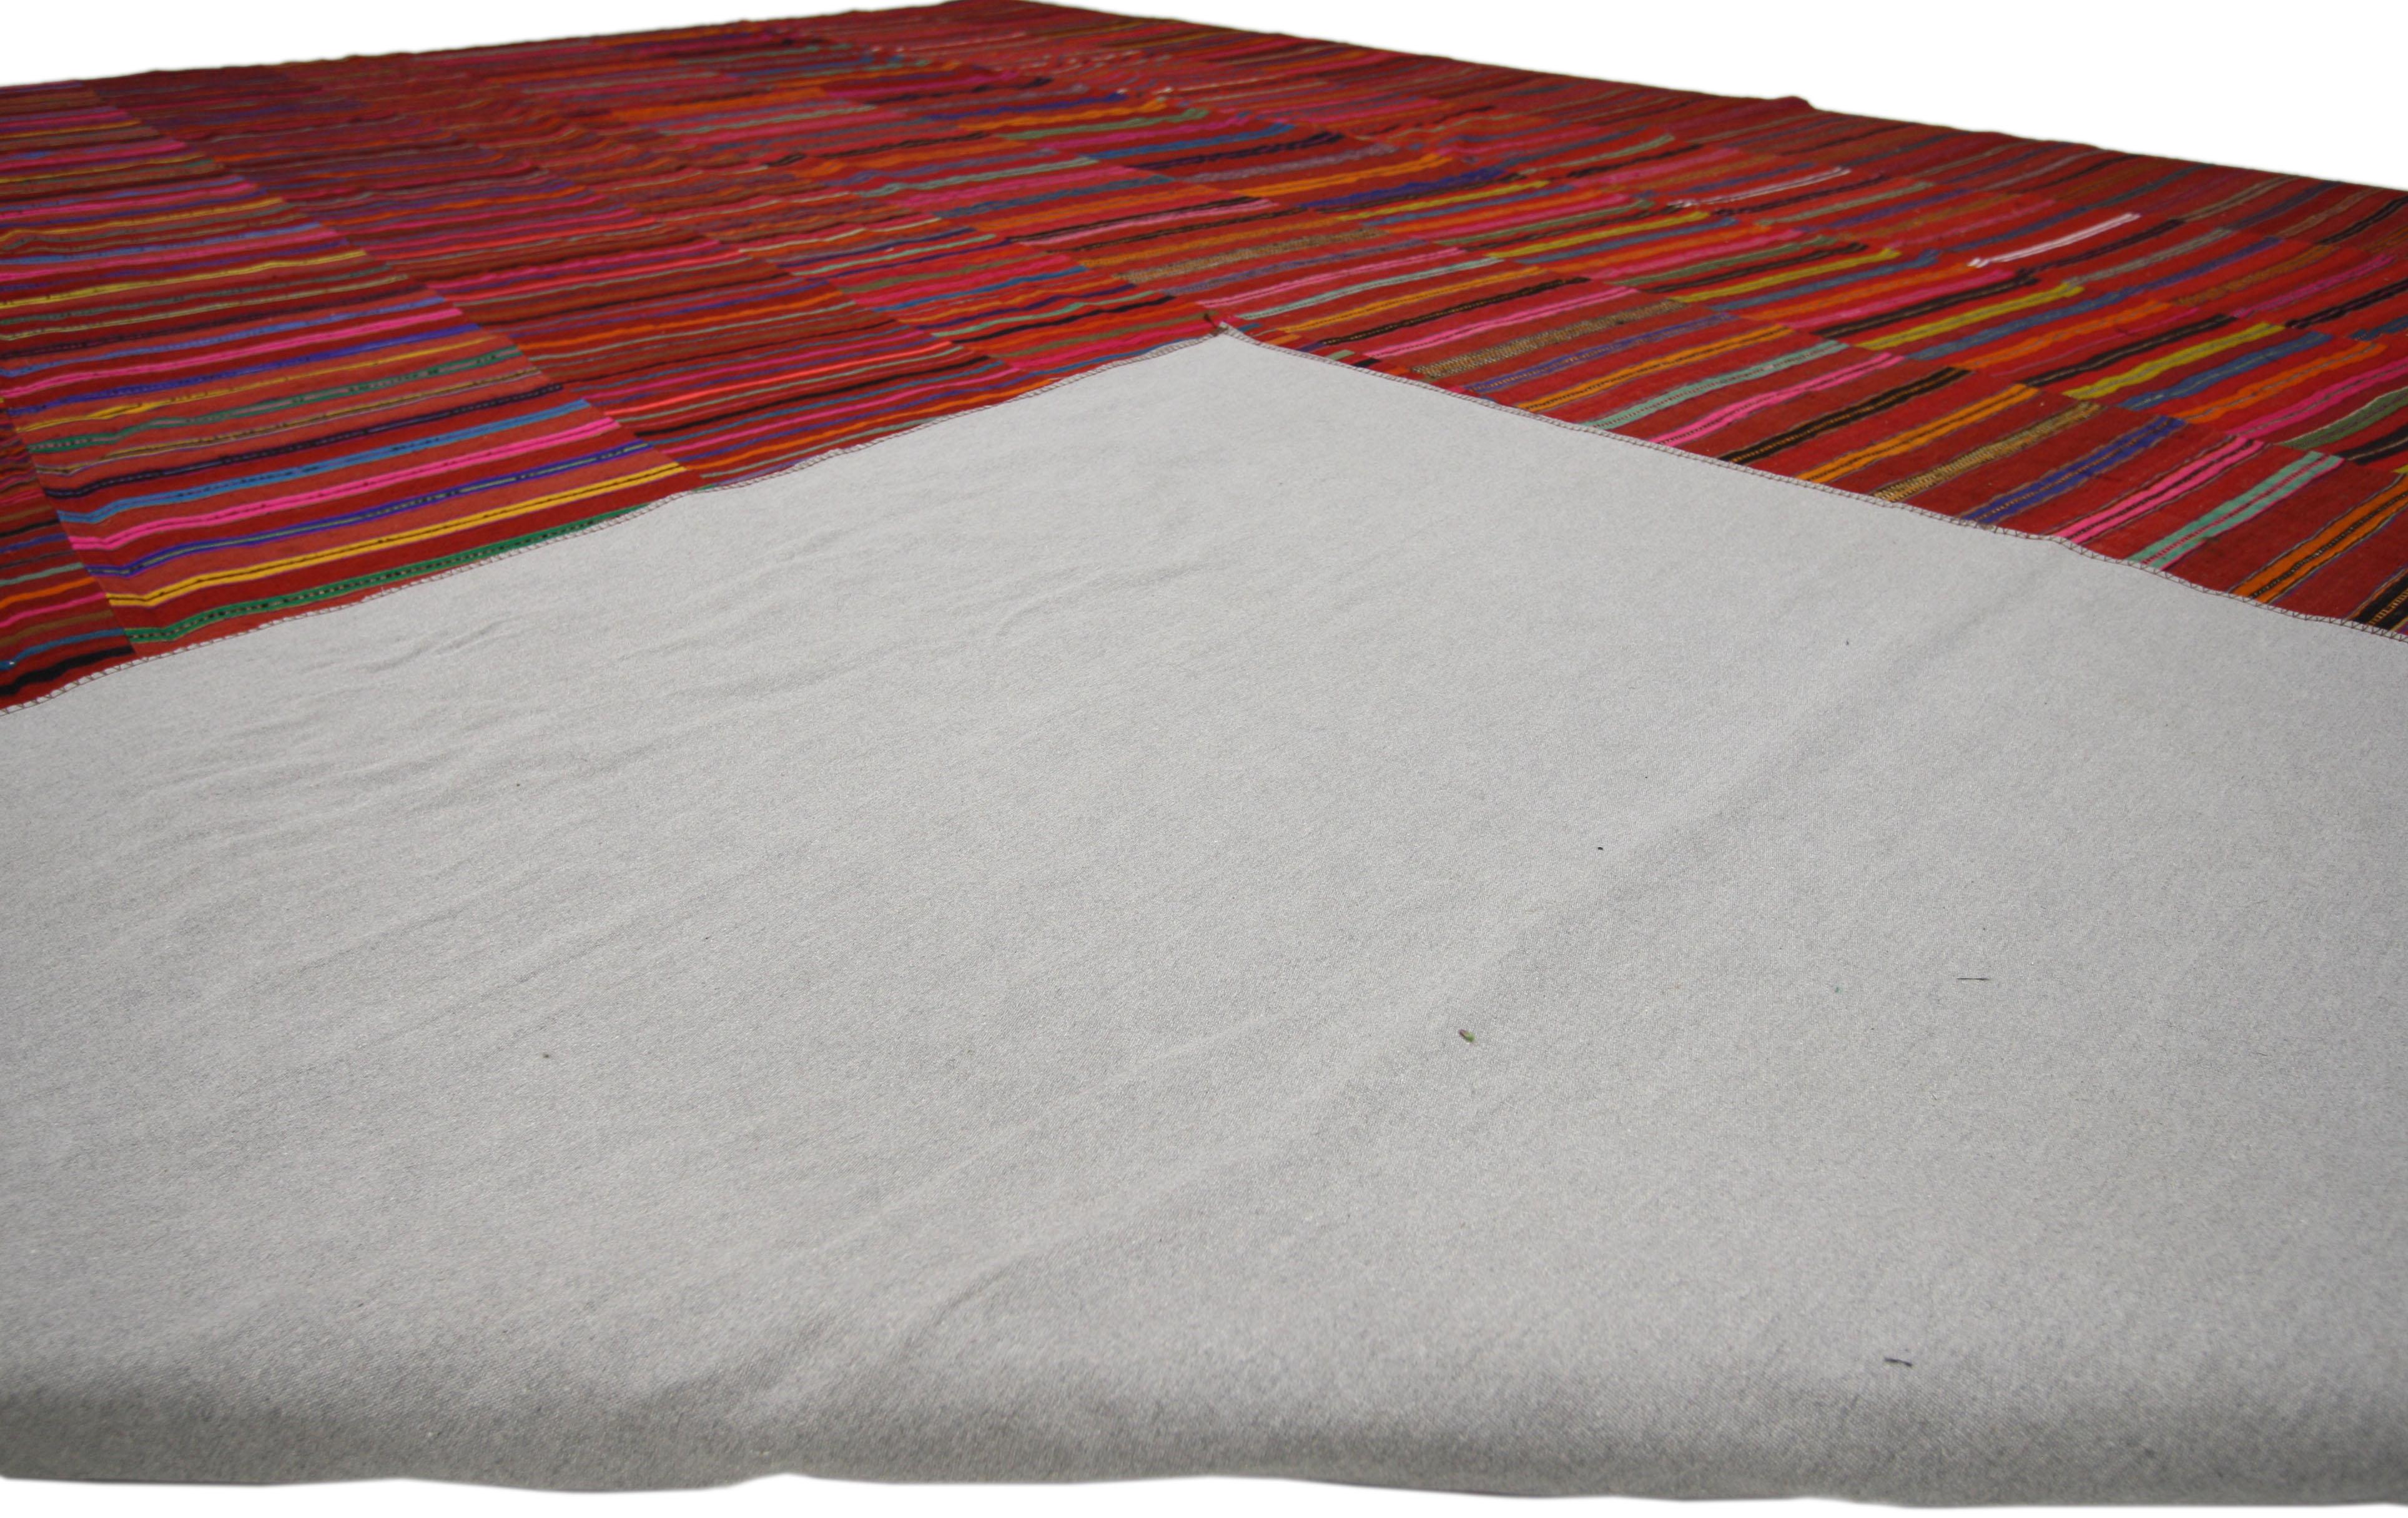 Hand-Woven Vintage Turkish Kilim Rug with Colorful Bayadere Stripes and Memphis Group Style